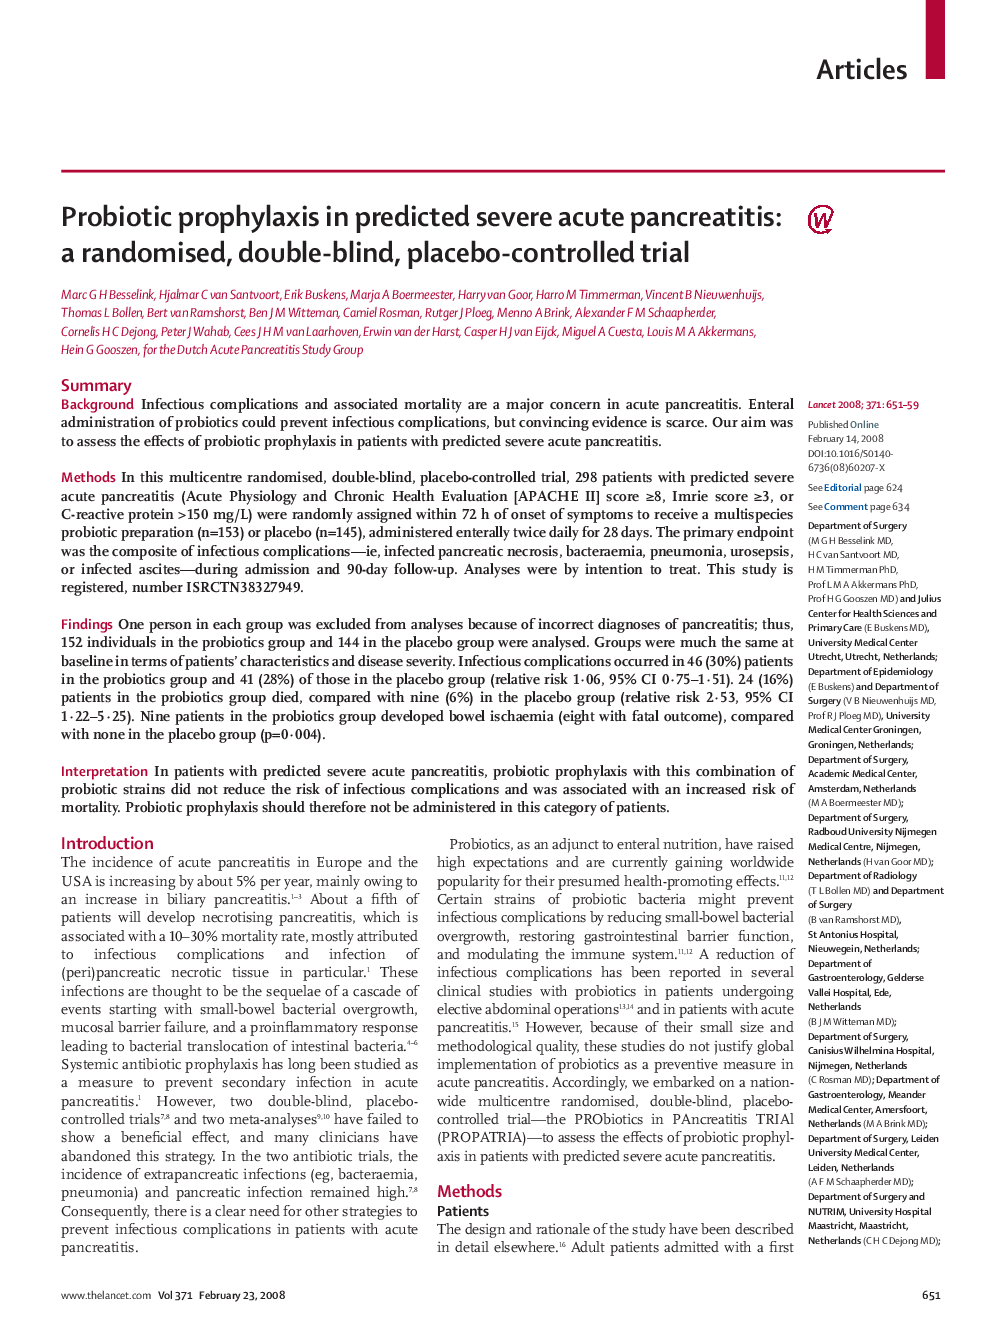 Probiotic prophylaxis in predicted severe acute pancreatitis: a randomised, double-blind, placebo-controlled trial